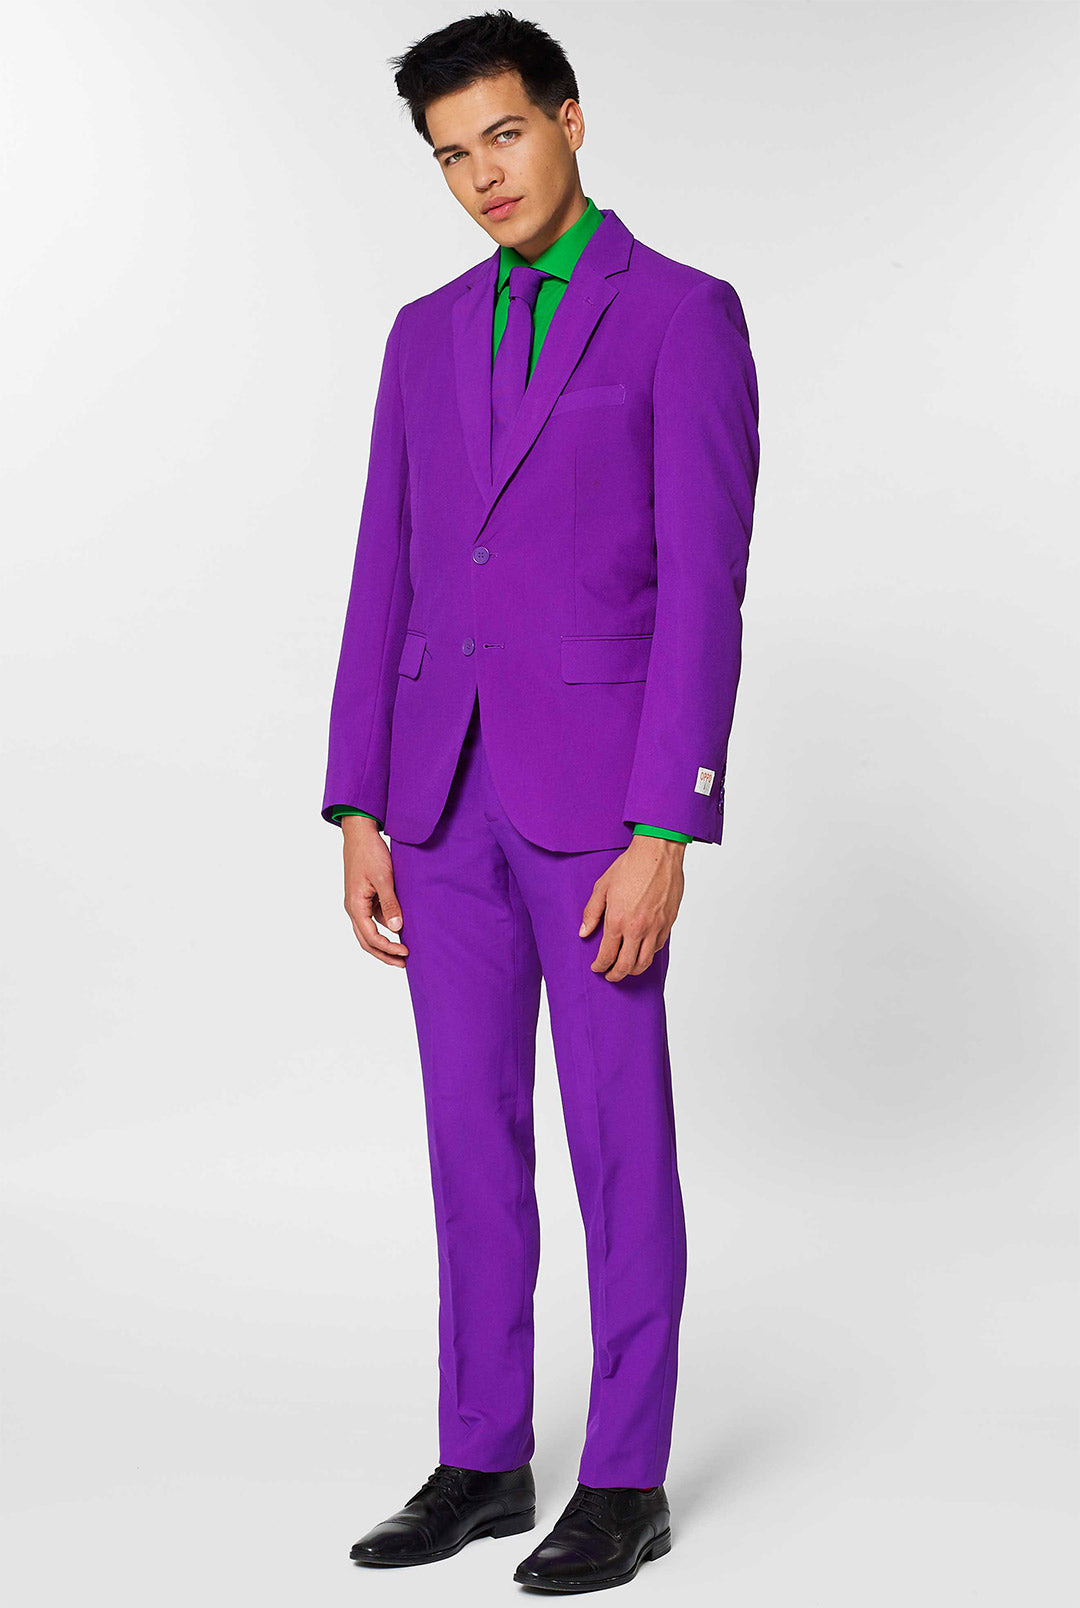 Looking for a purple suit? Draw attention with | OppoSuits